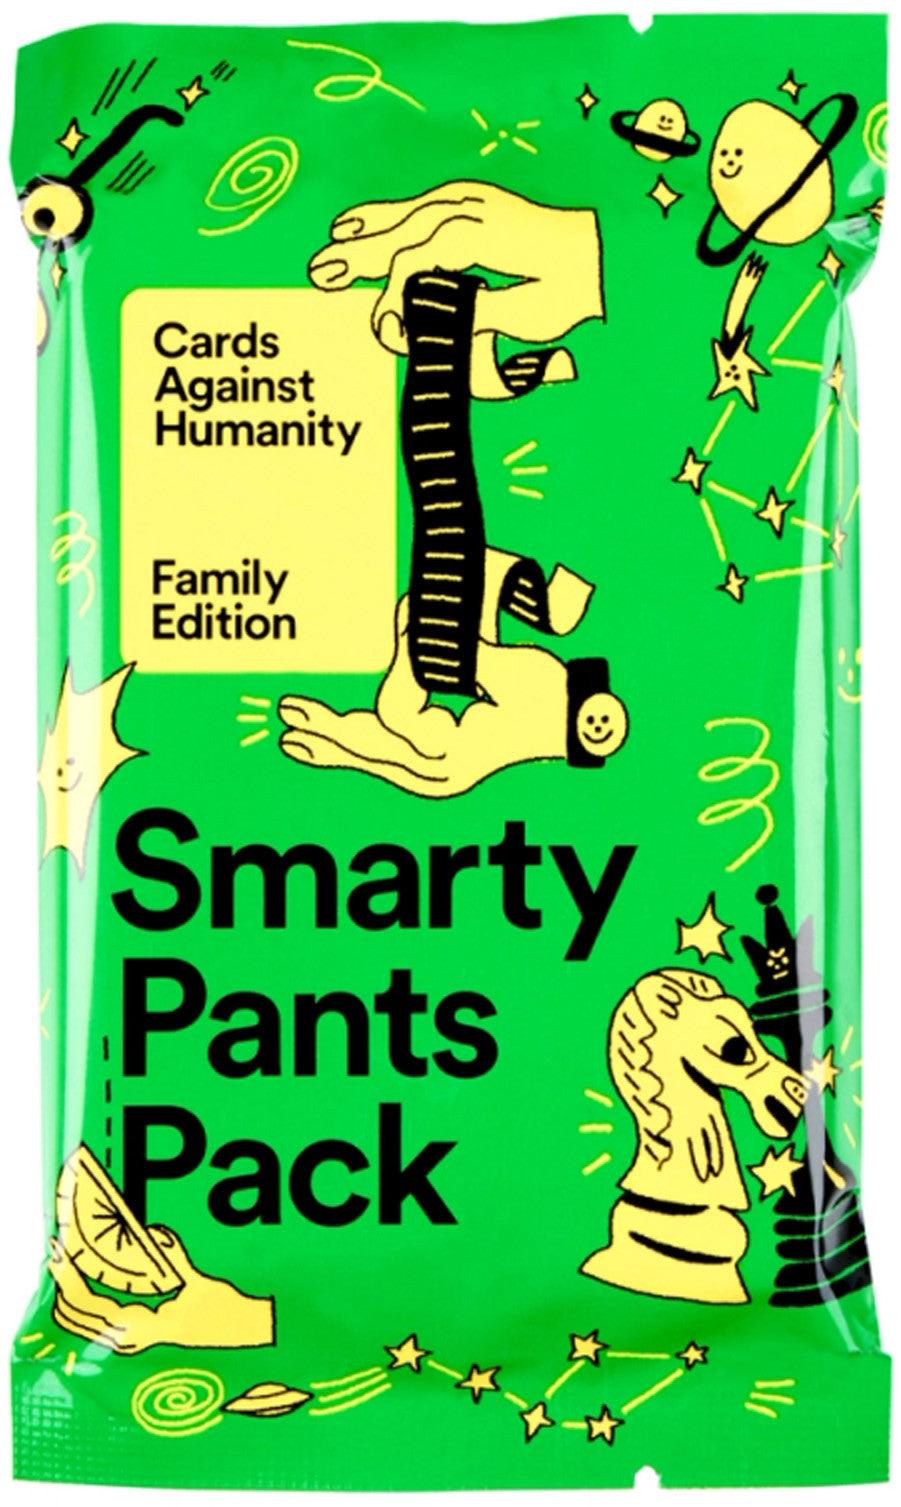 Cards Against Humanity Smarty Pants Pack (Do not sell on online marketplaces)